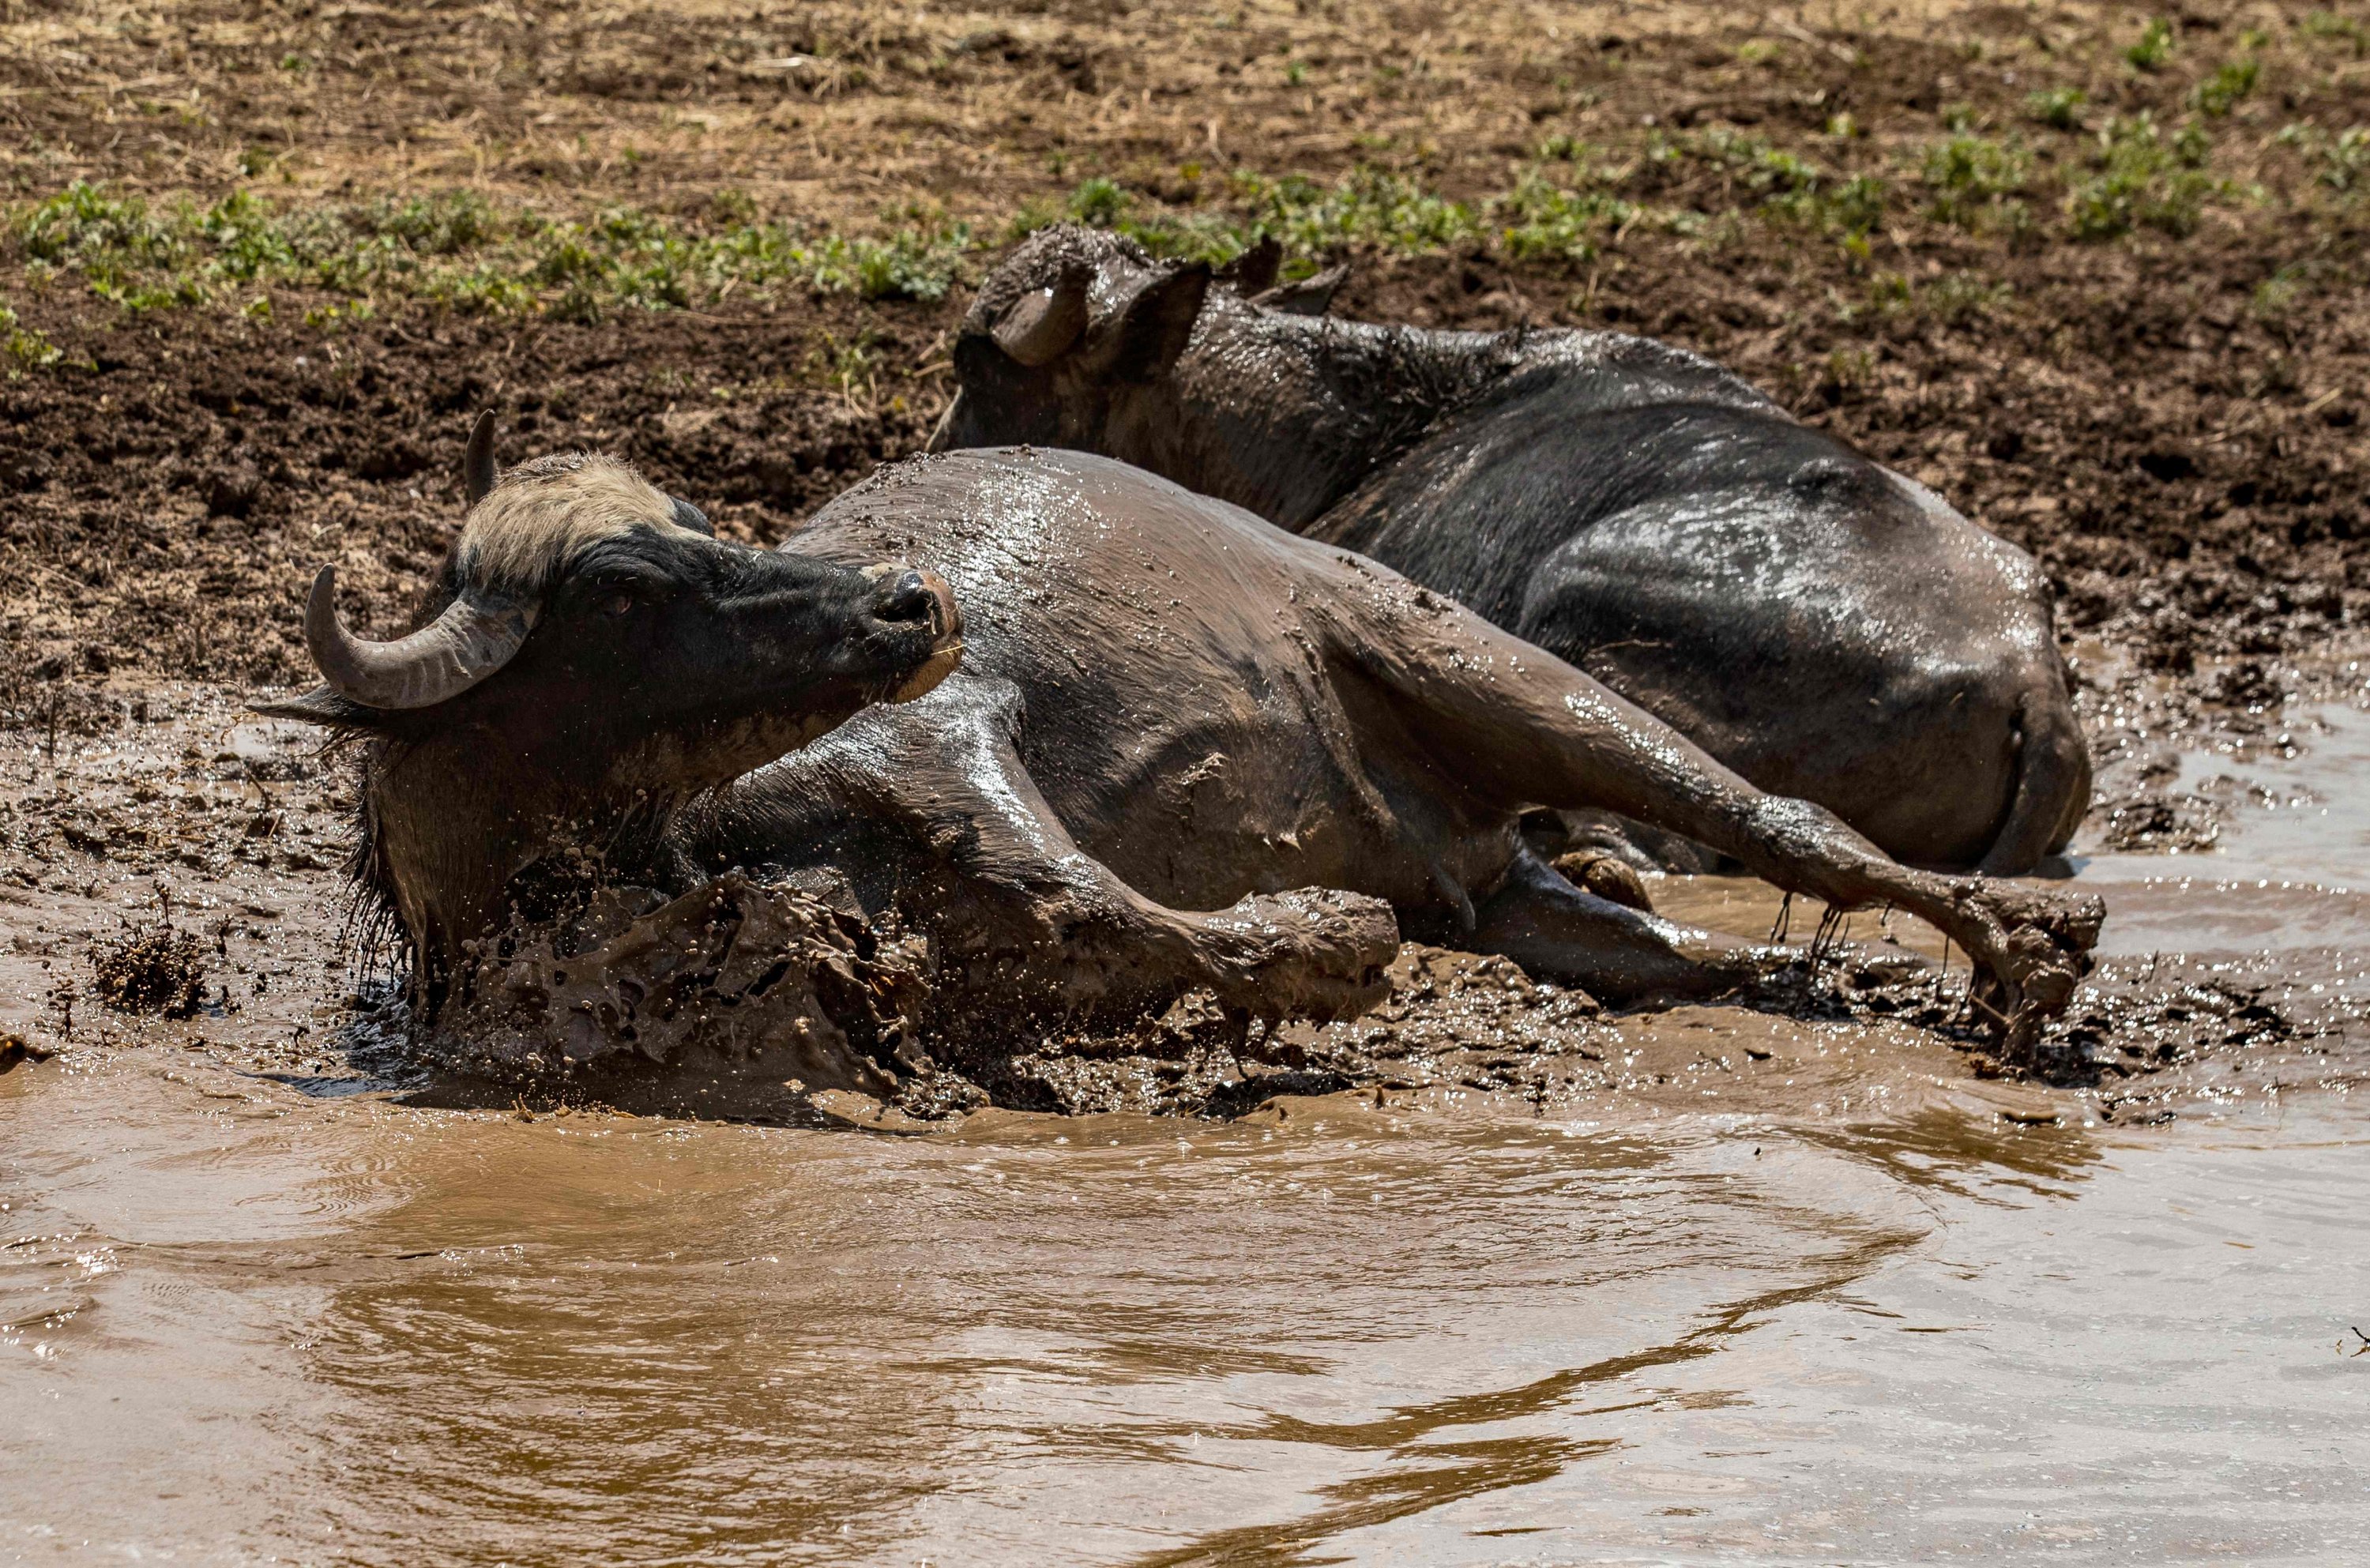 Buffalos belonging to Syrian shepherds cool down in a puddle of mud amid scorching temperatures, in al-Malikiyah (Derik) in Syria